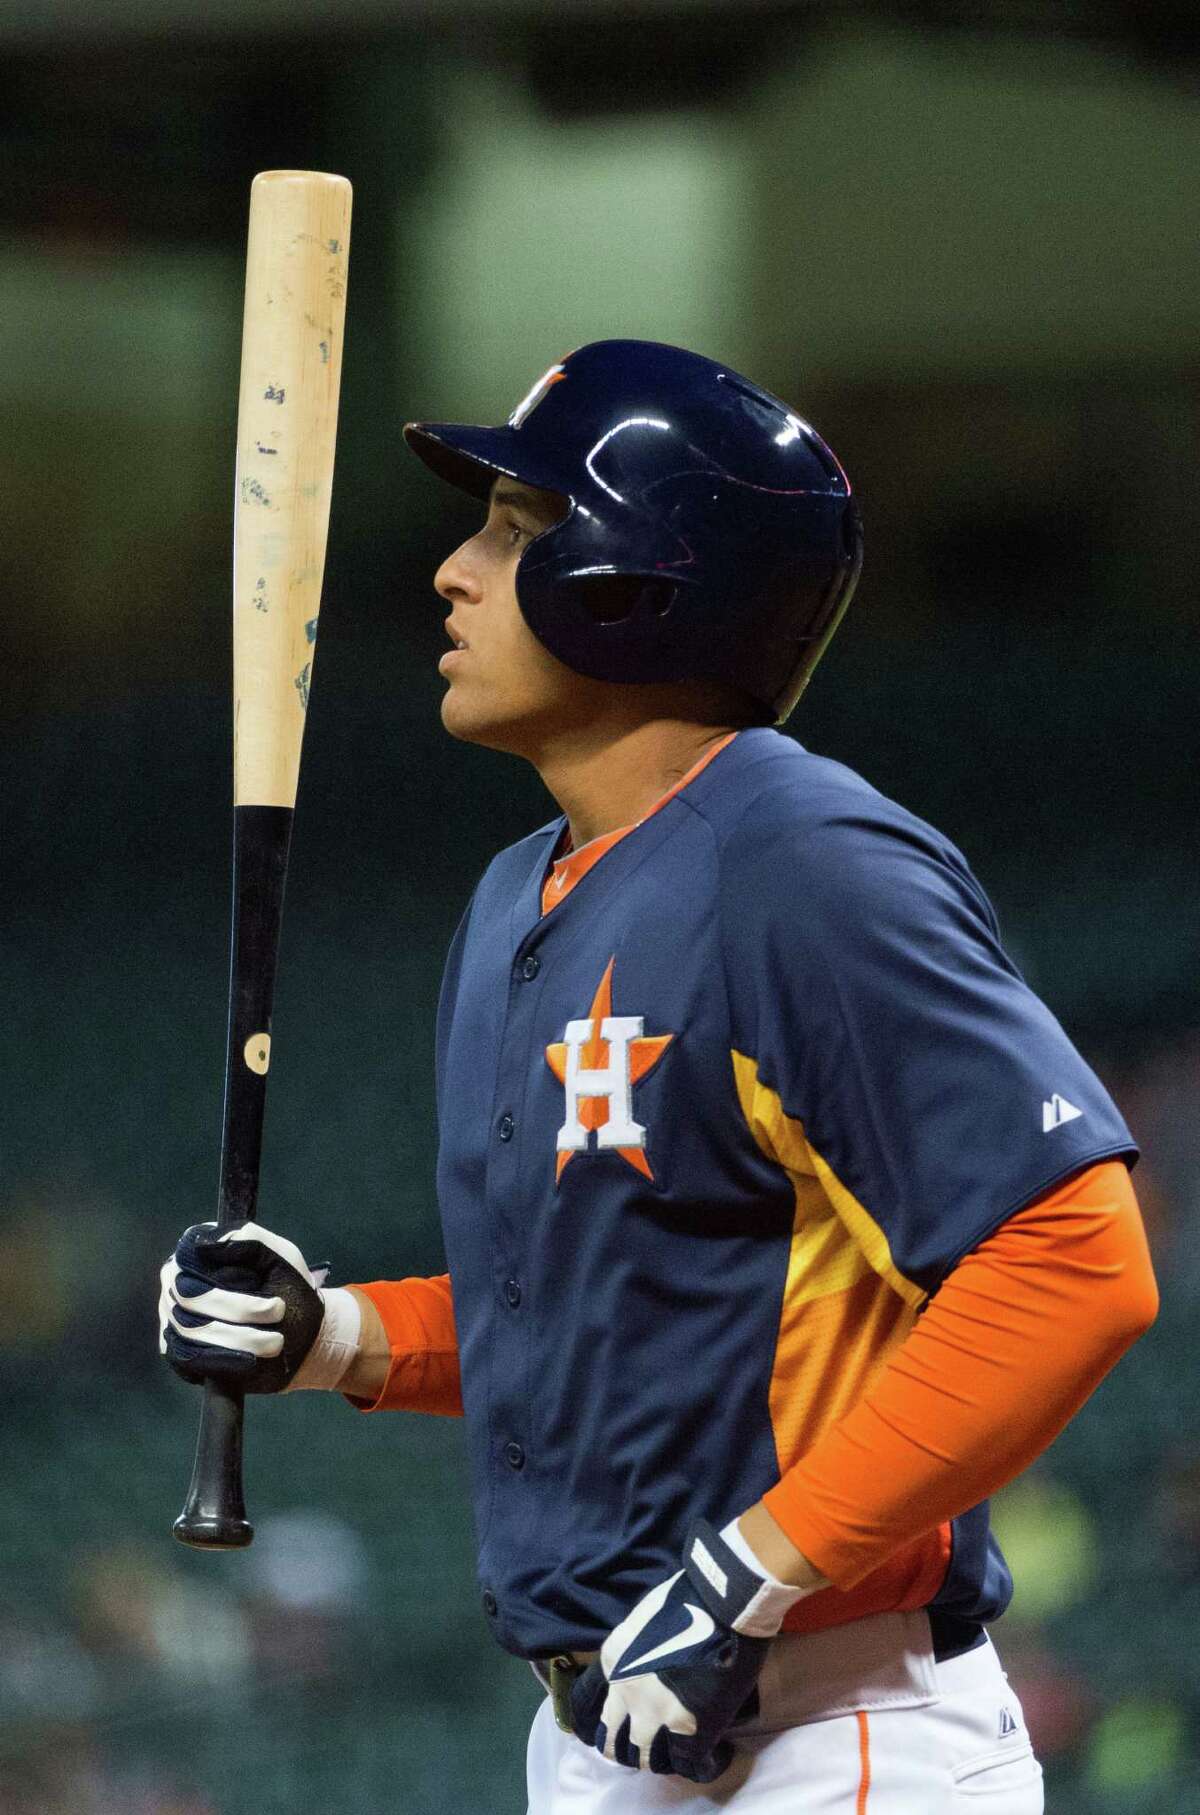 Top prospect George Springer isn't in a particular rush to don an Astros uniform and knows that his time eventually will come.